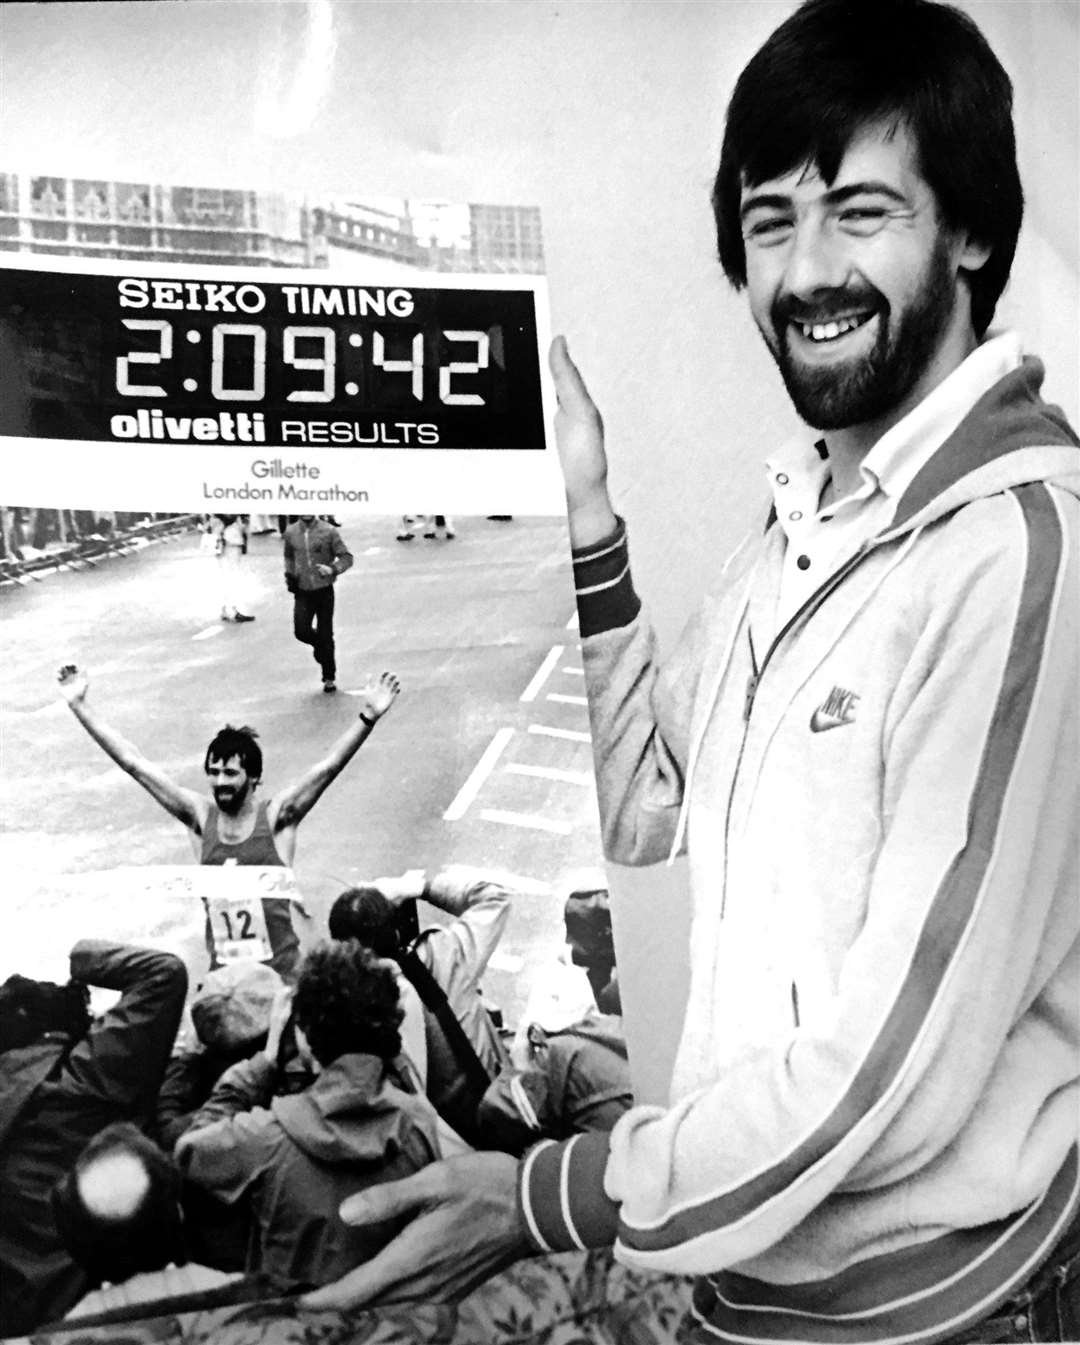 Mike Gratton poses with a picture of him crossing the finishing line